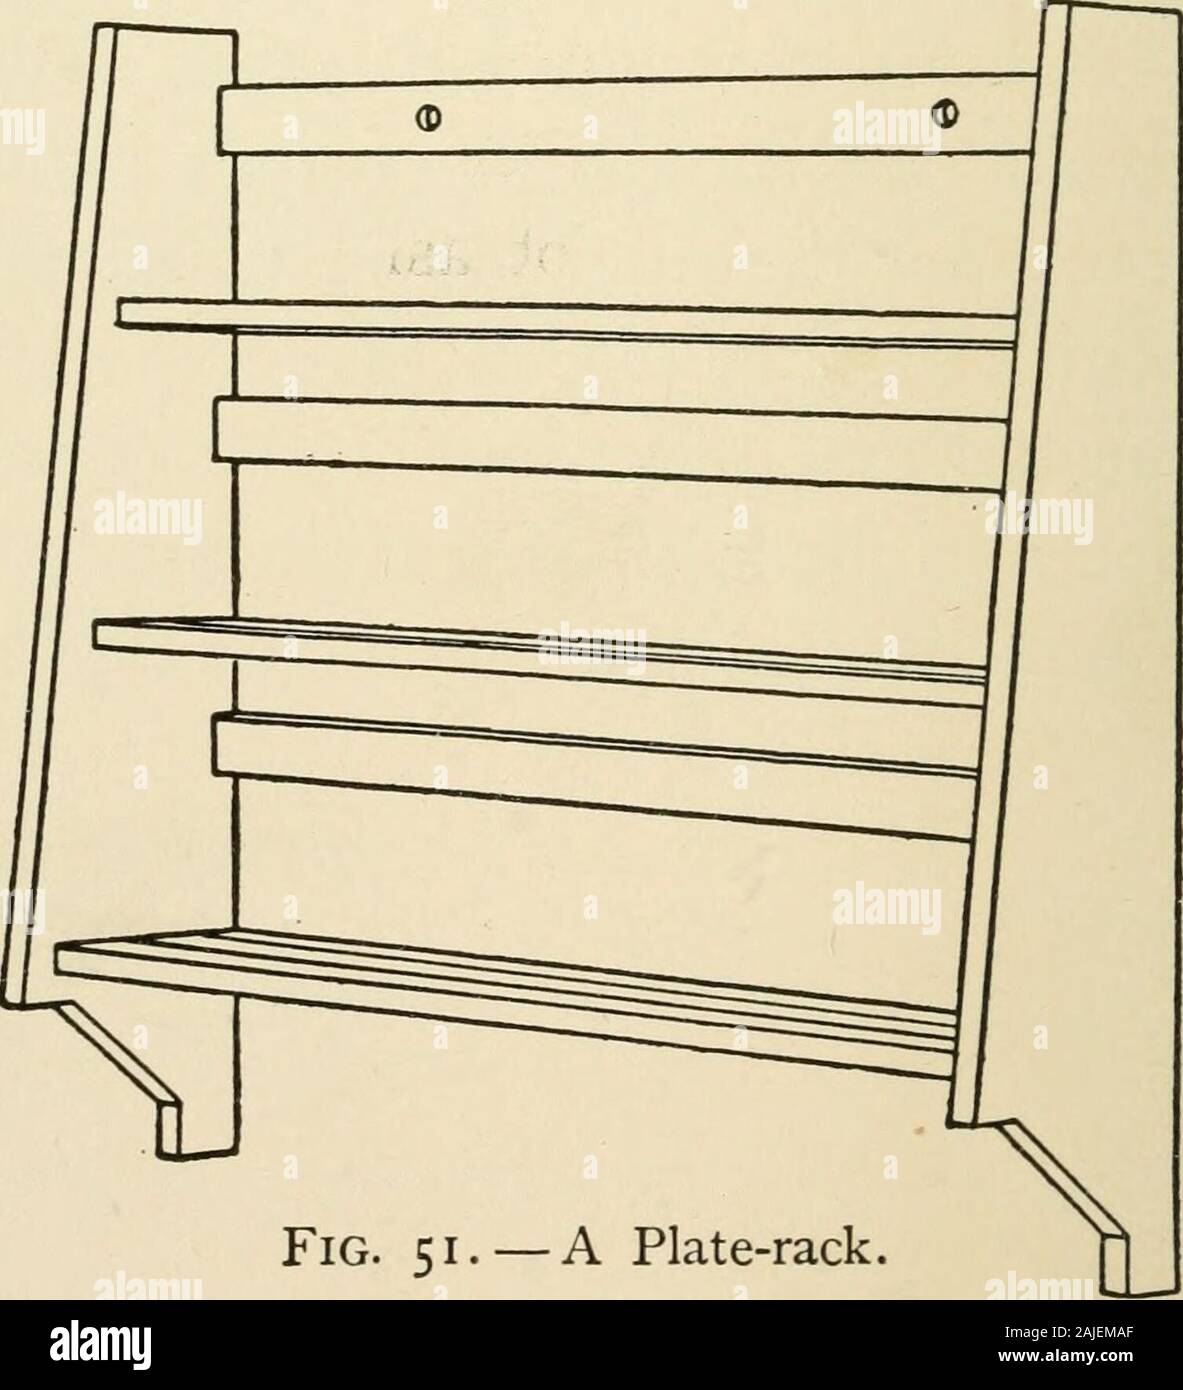 The boy craftsman; practical ad profitable ideas for a boy's leisure hours . sh for the bottom (see Fig. 49). 54 PROFITABLE PASTIMES Fasten four trunk-casters, such as are shown in Fig. 50,to the bottom of the frame, and fit a broom-stick in oneft ^-^ fi side for a handle. A slot must be cut in^^^^^ the end of the box for the handle to fit in. Fig. 50. A Bread-board may be made out of a Trunk-caster, geven-eighths inch maple board about ten by eighteen inches, with the surface planed perfectly smooth and the edges bevelled or rounded. A hole should be bored near one edge, so it may be hung up Stock Photo